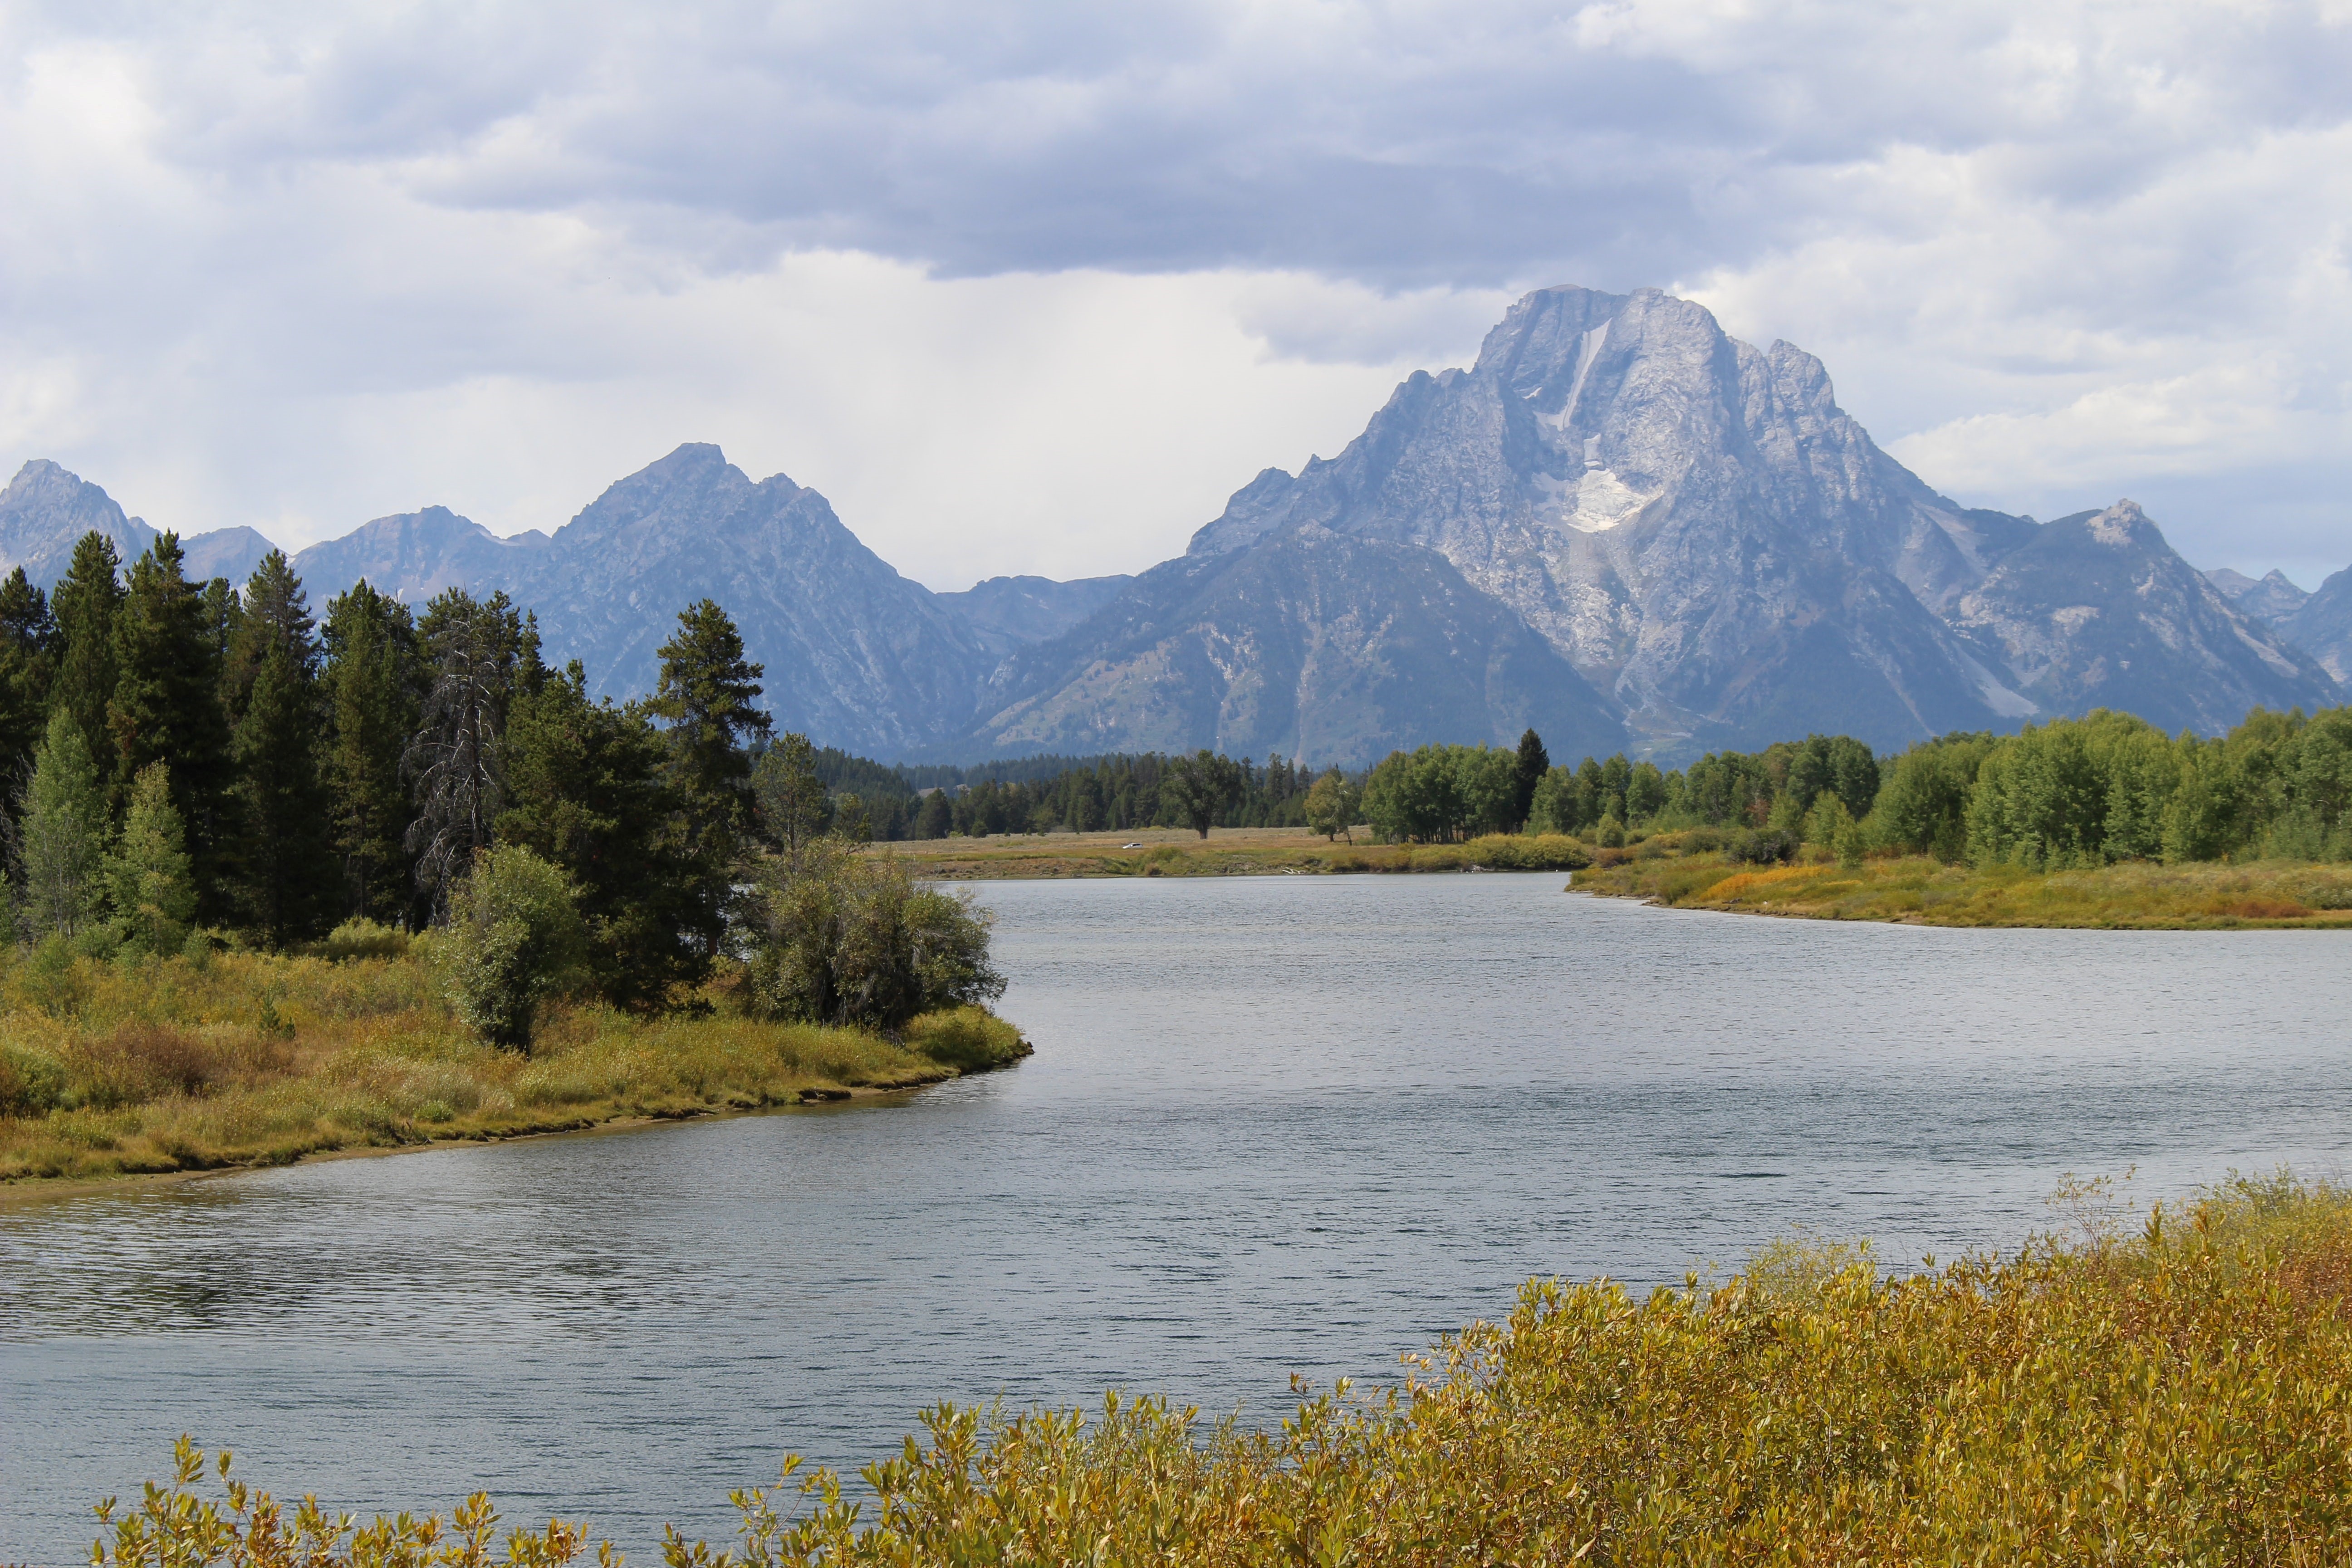 A view of the Snake River with the Tetons in the background on an overcast day.